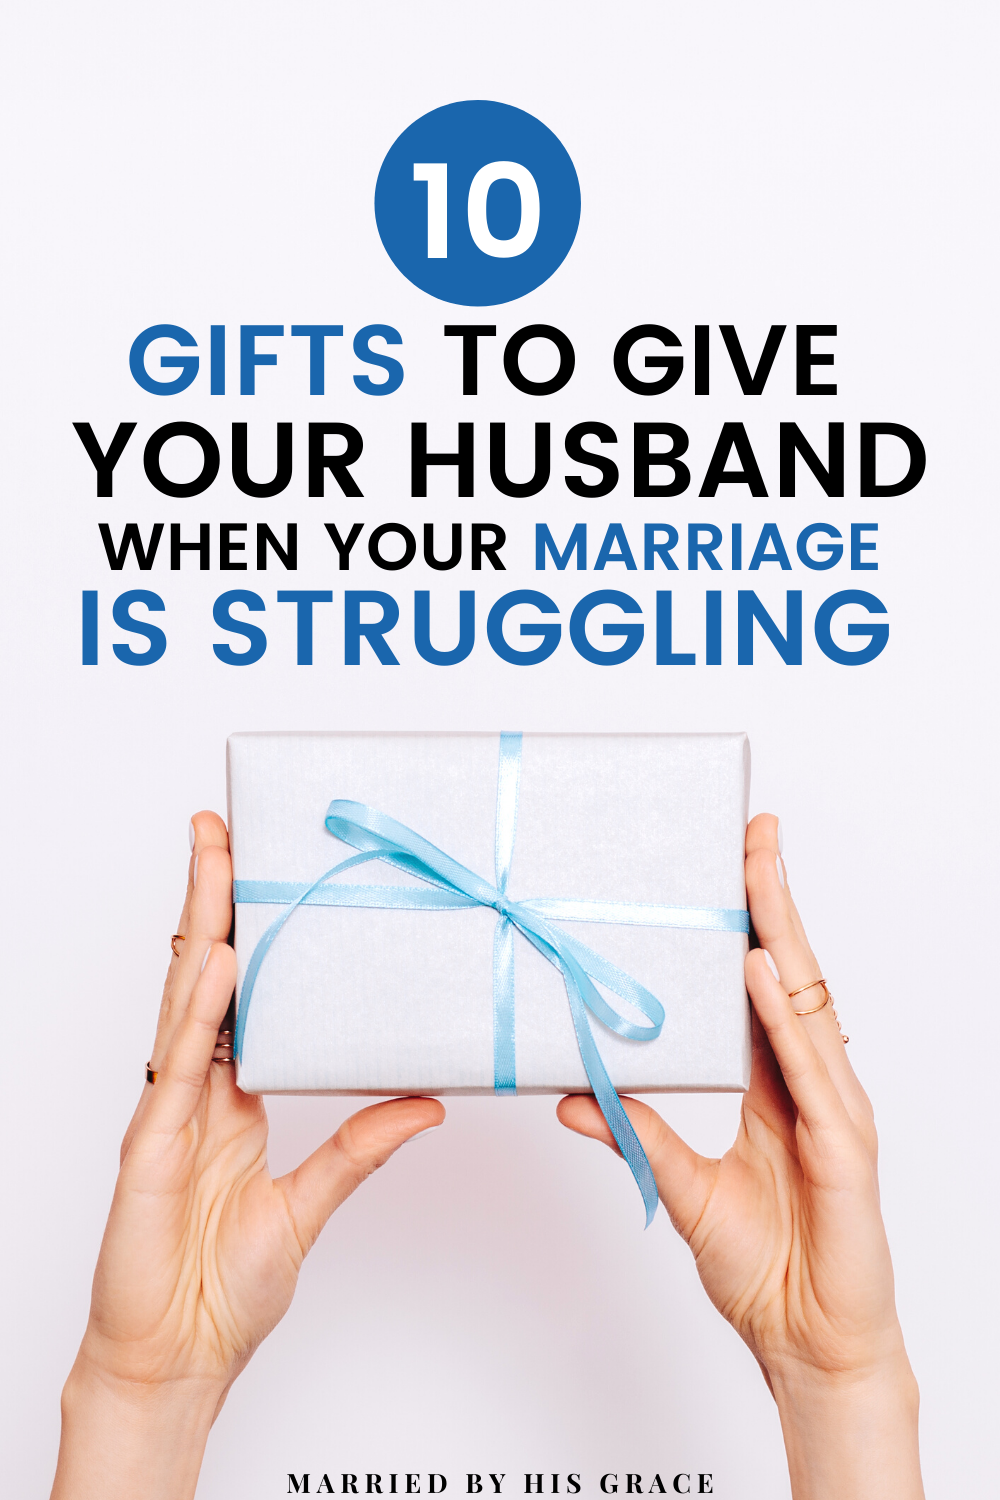 10 Gift Ideas for Your Husand